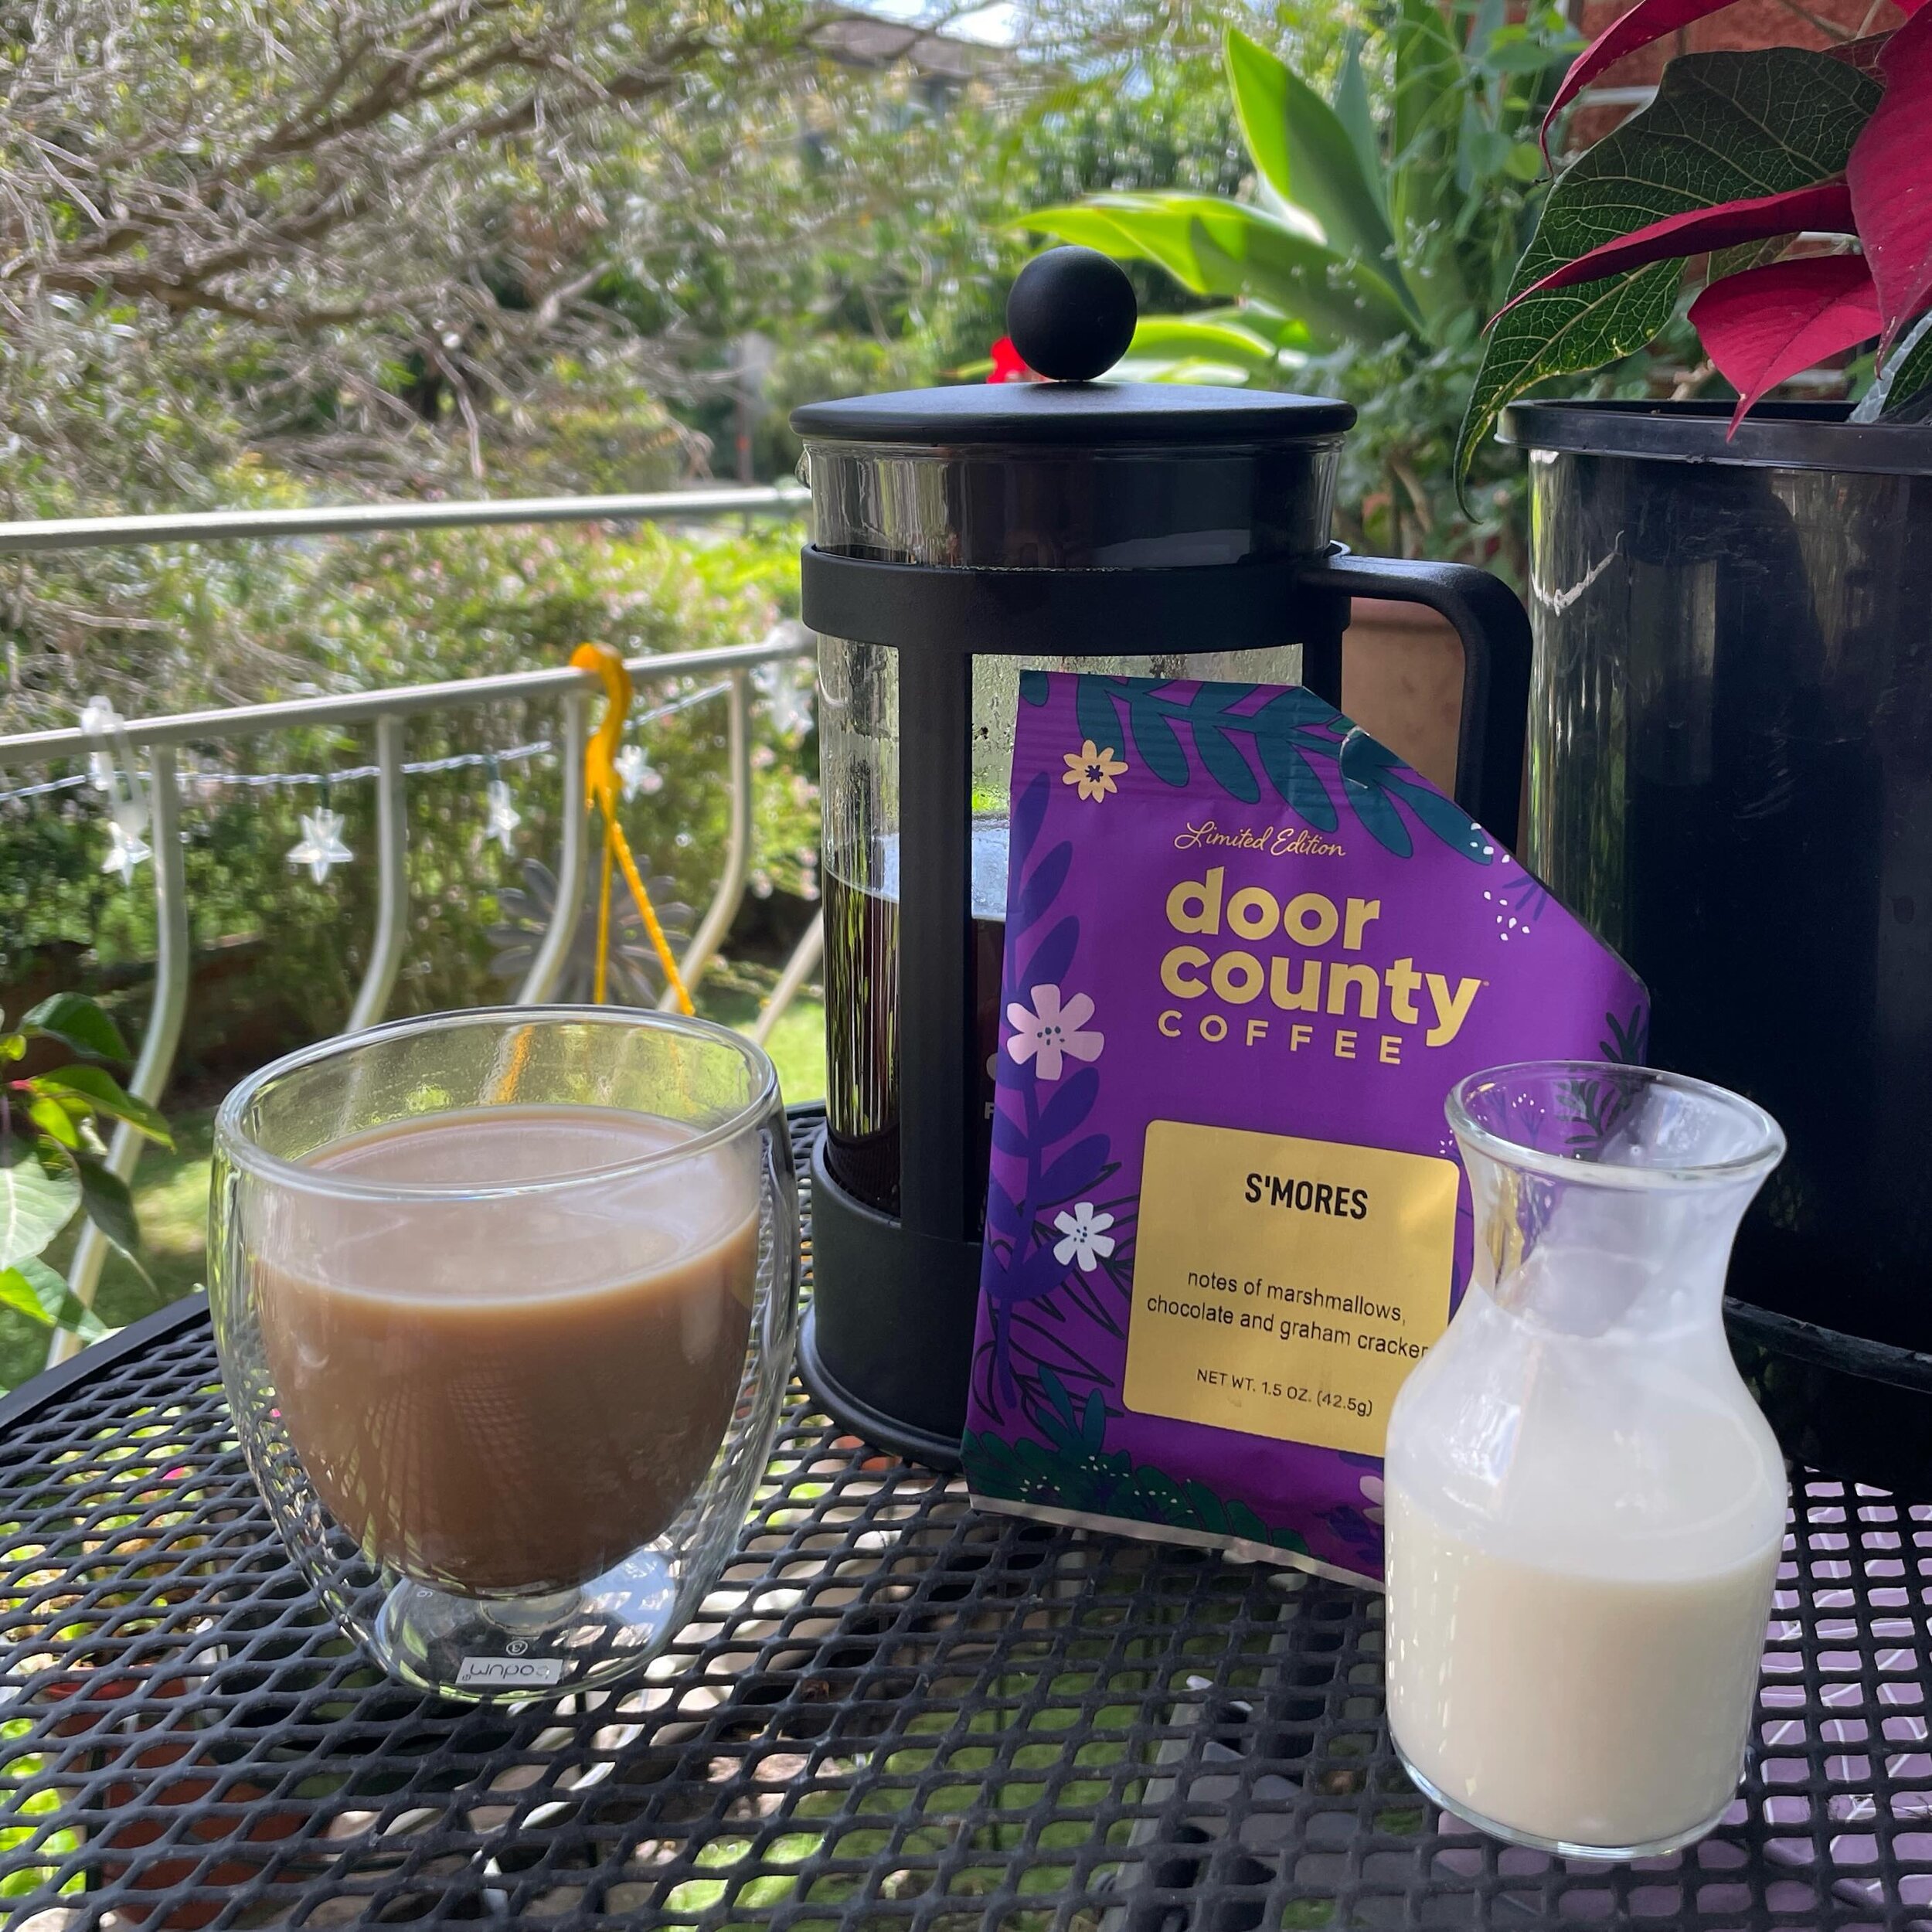 Brought my #DoorCountyCoffee #downunder to enjoy and remember my stay there while on my sunny balcony in #Sydney #Australia #destinationDoorCounty
#TravelWisconsin #doorcountywi 
#visittheusa
#RoadTestingTheWorld
#ThePackedBag